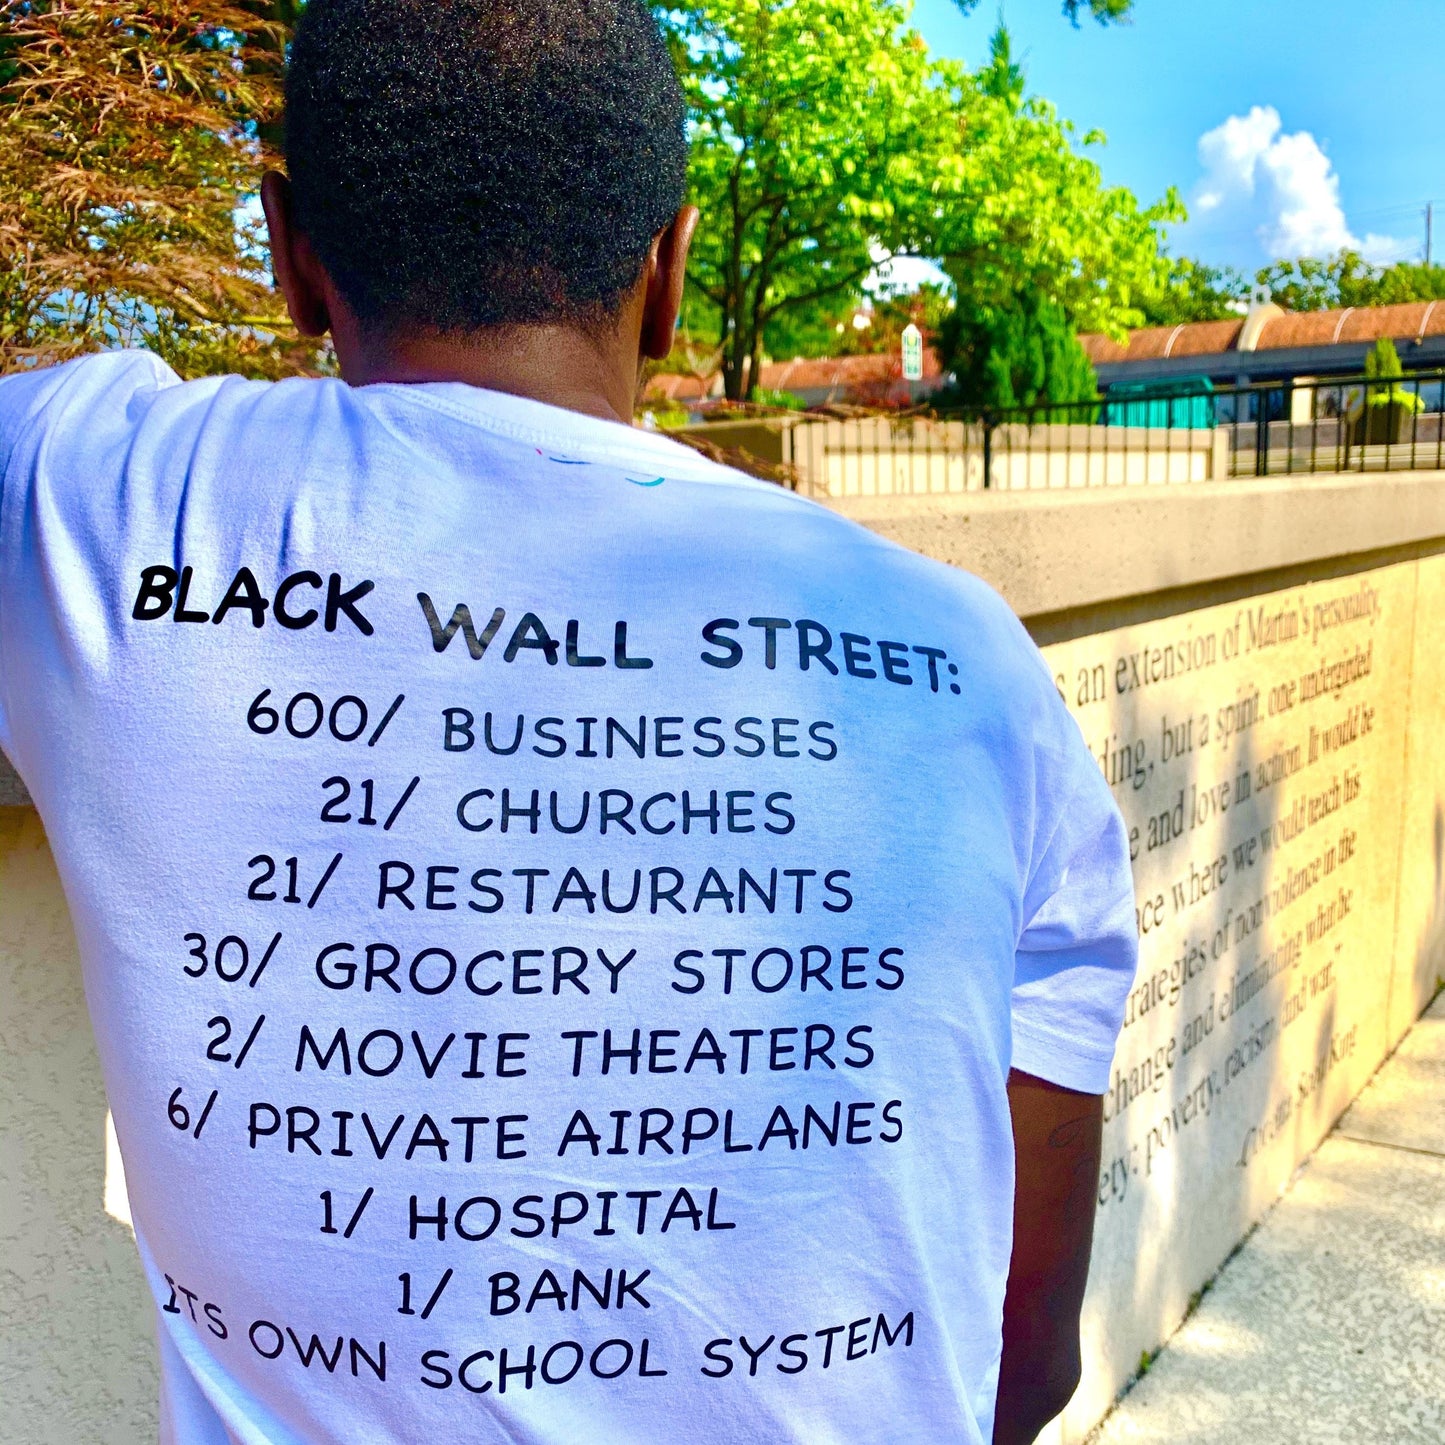 Limited Edition “Black Wall Street” Unisex T-shirt (White)